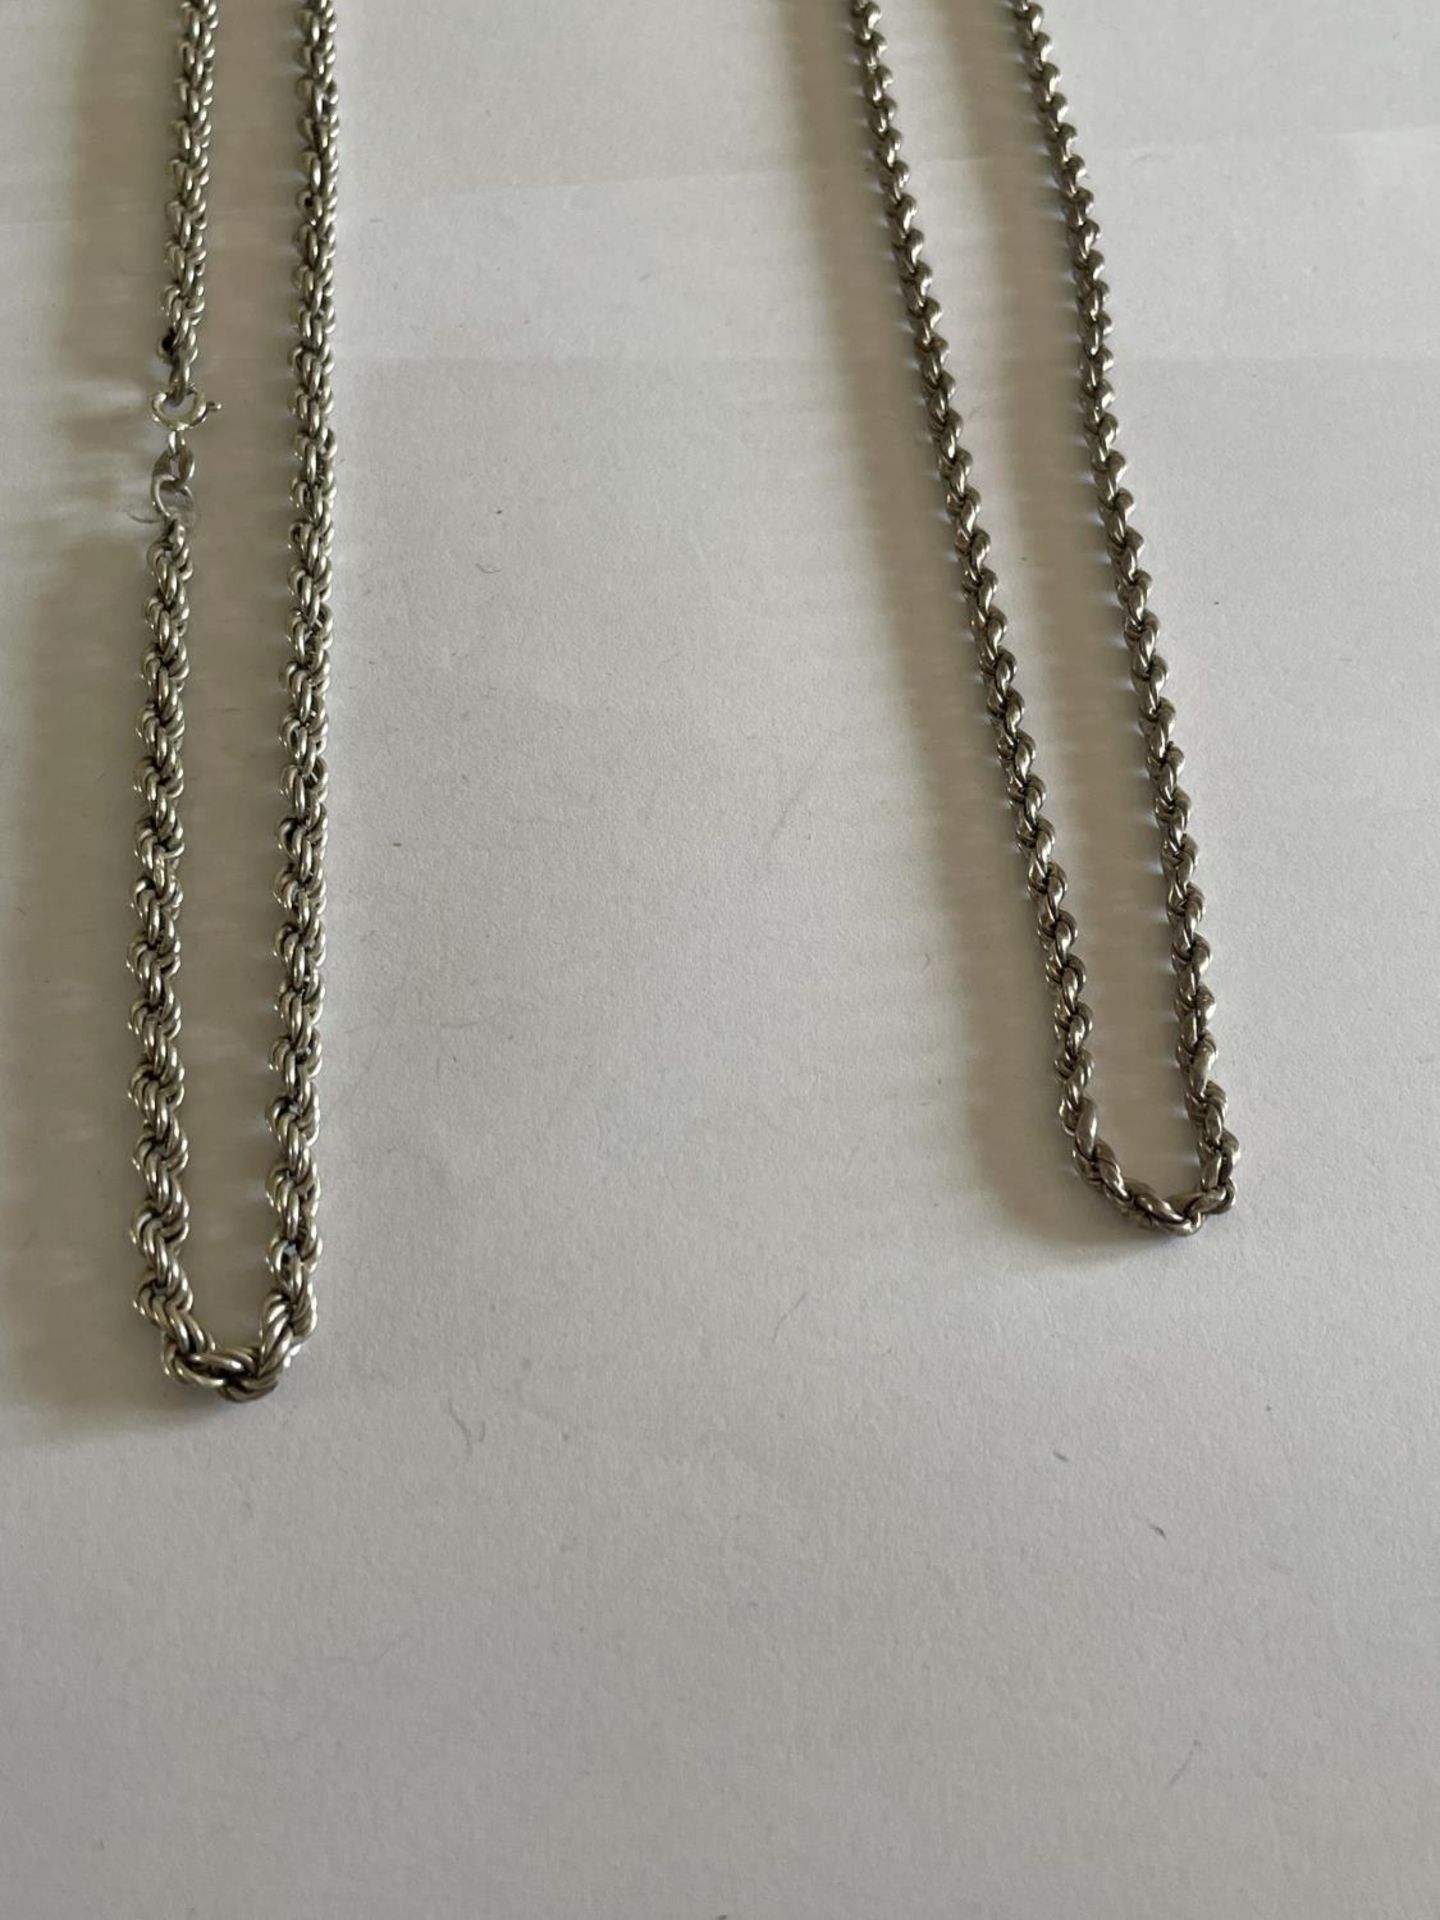 TWO SILVER ROPE NECKLACES LENGTH 18 INCHES - Bild 2 aus 2